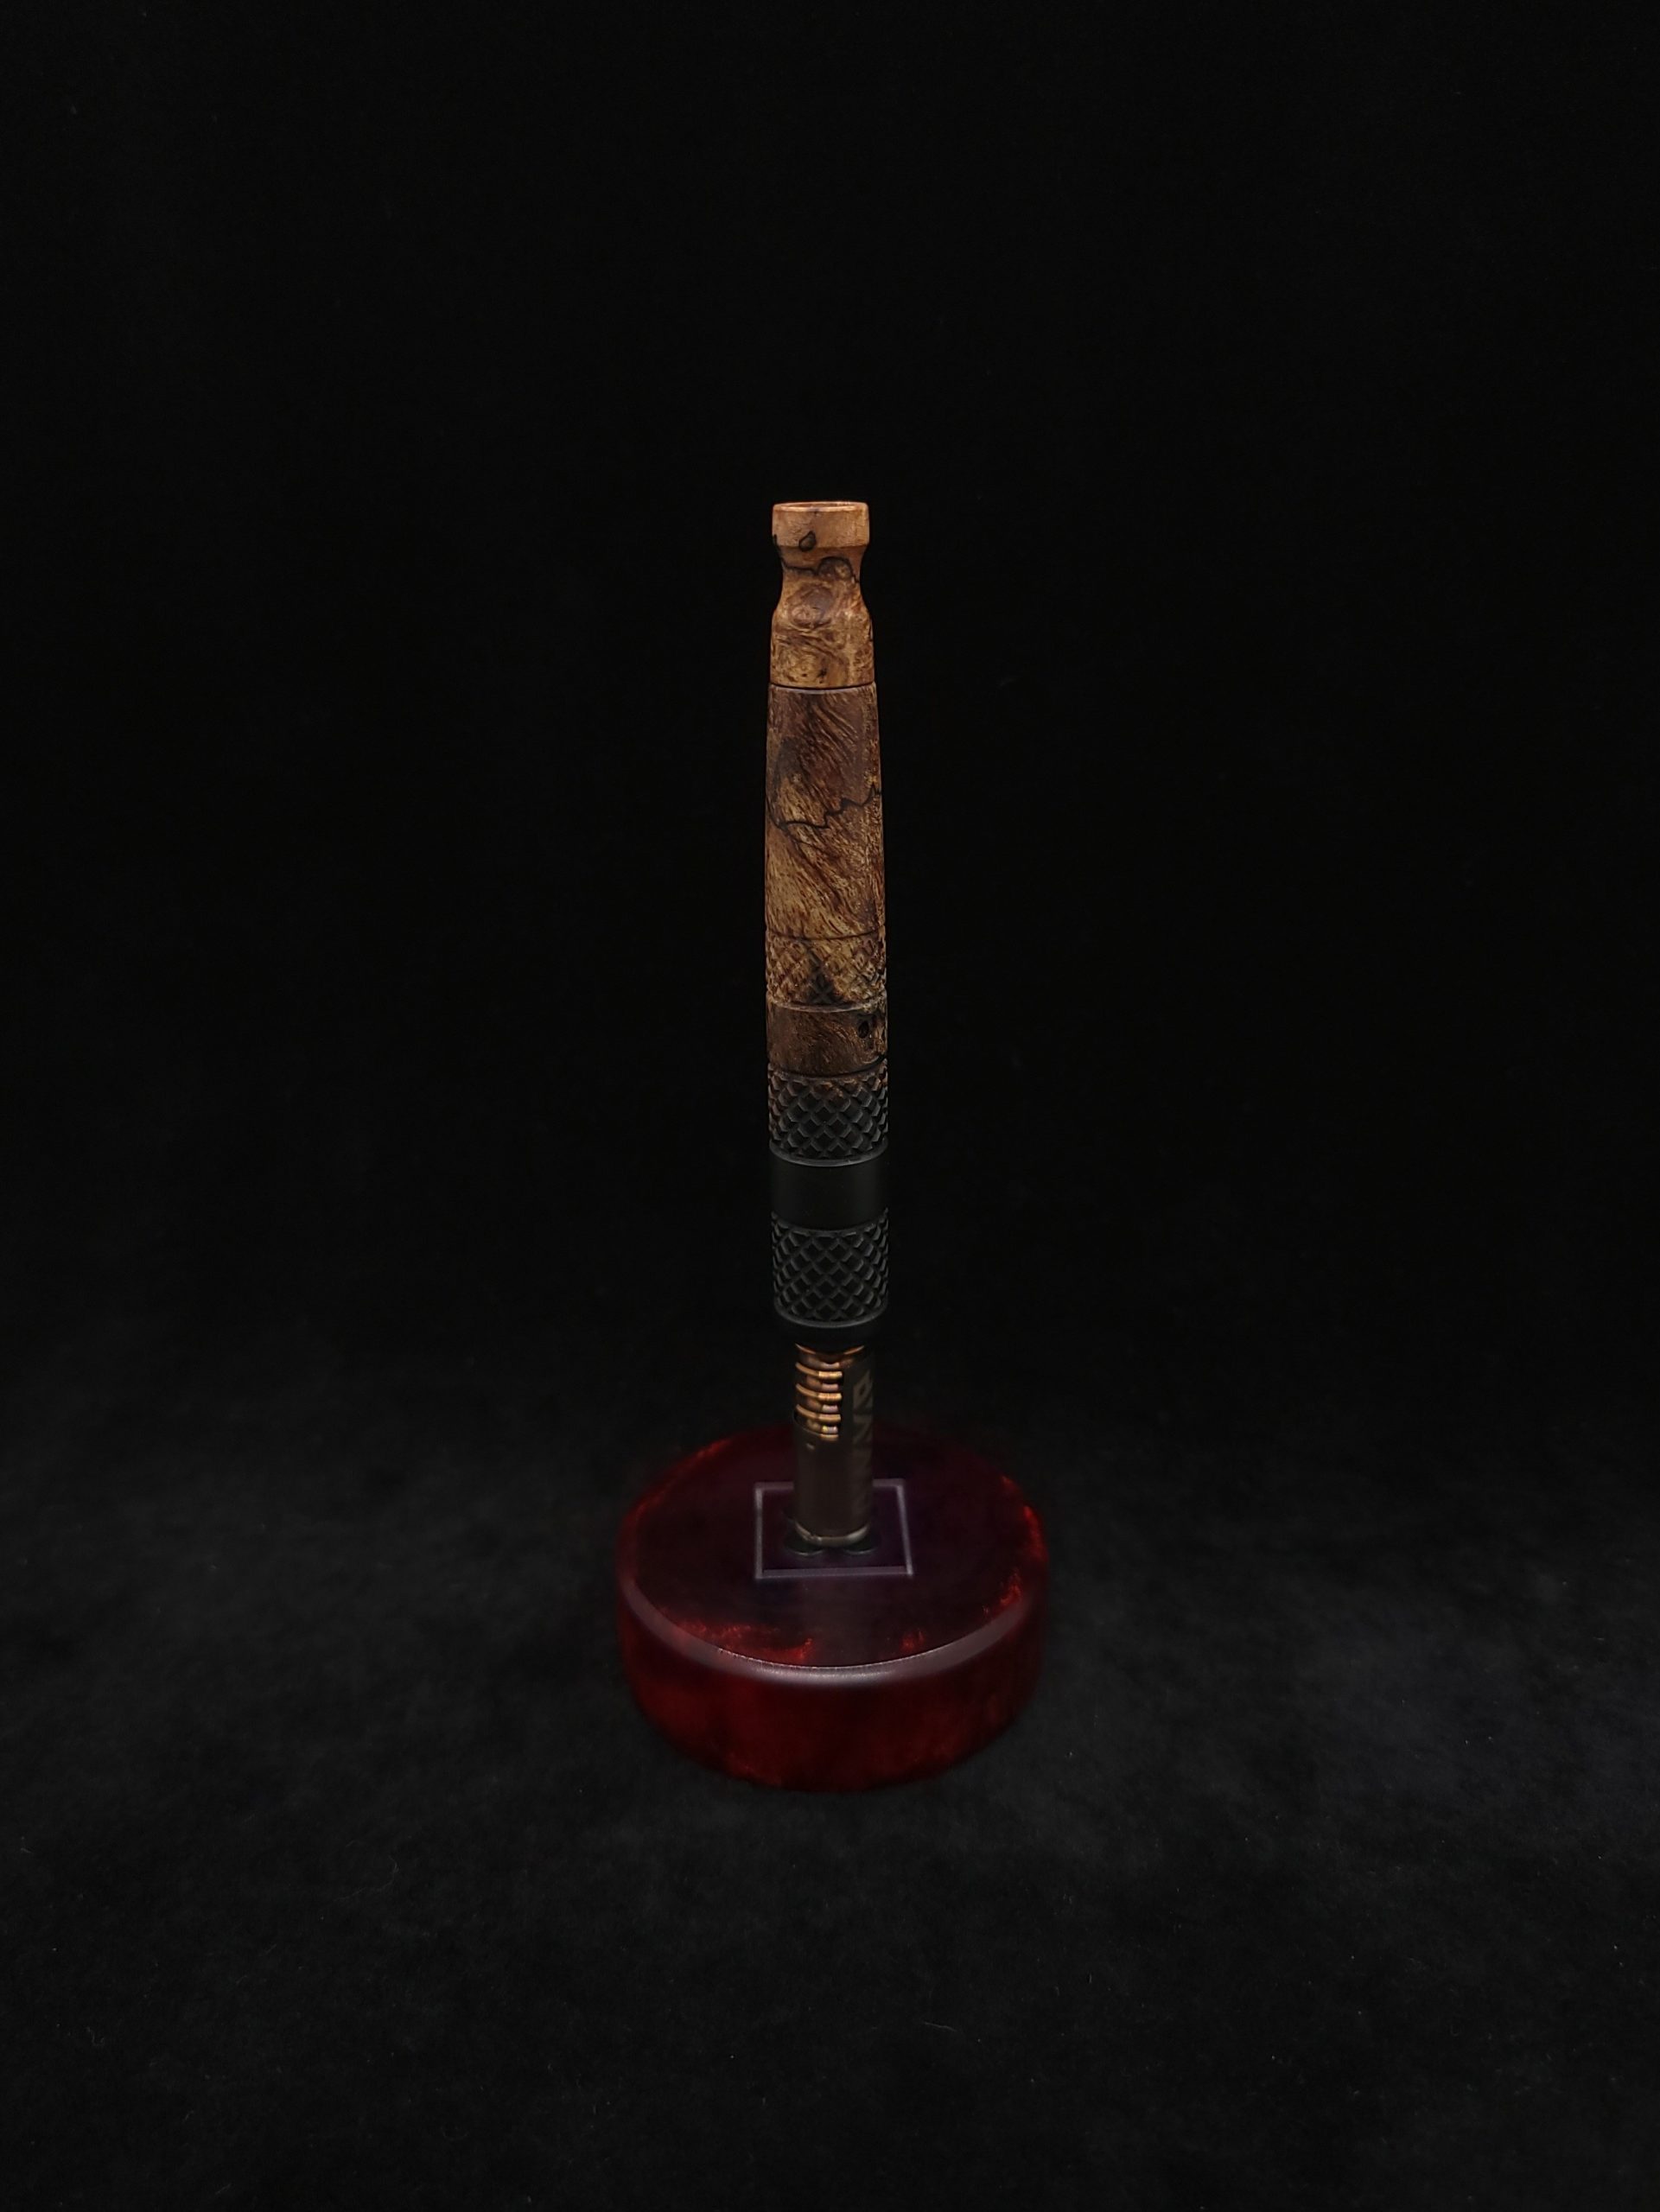 This image portrays High Class-Knurled XL Dynavap Stem/Matte Black Burl Hybrid + Matching M.P. by Dovetail Woodwork.